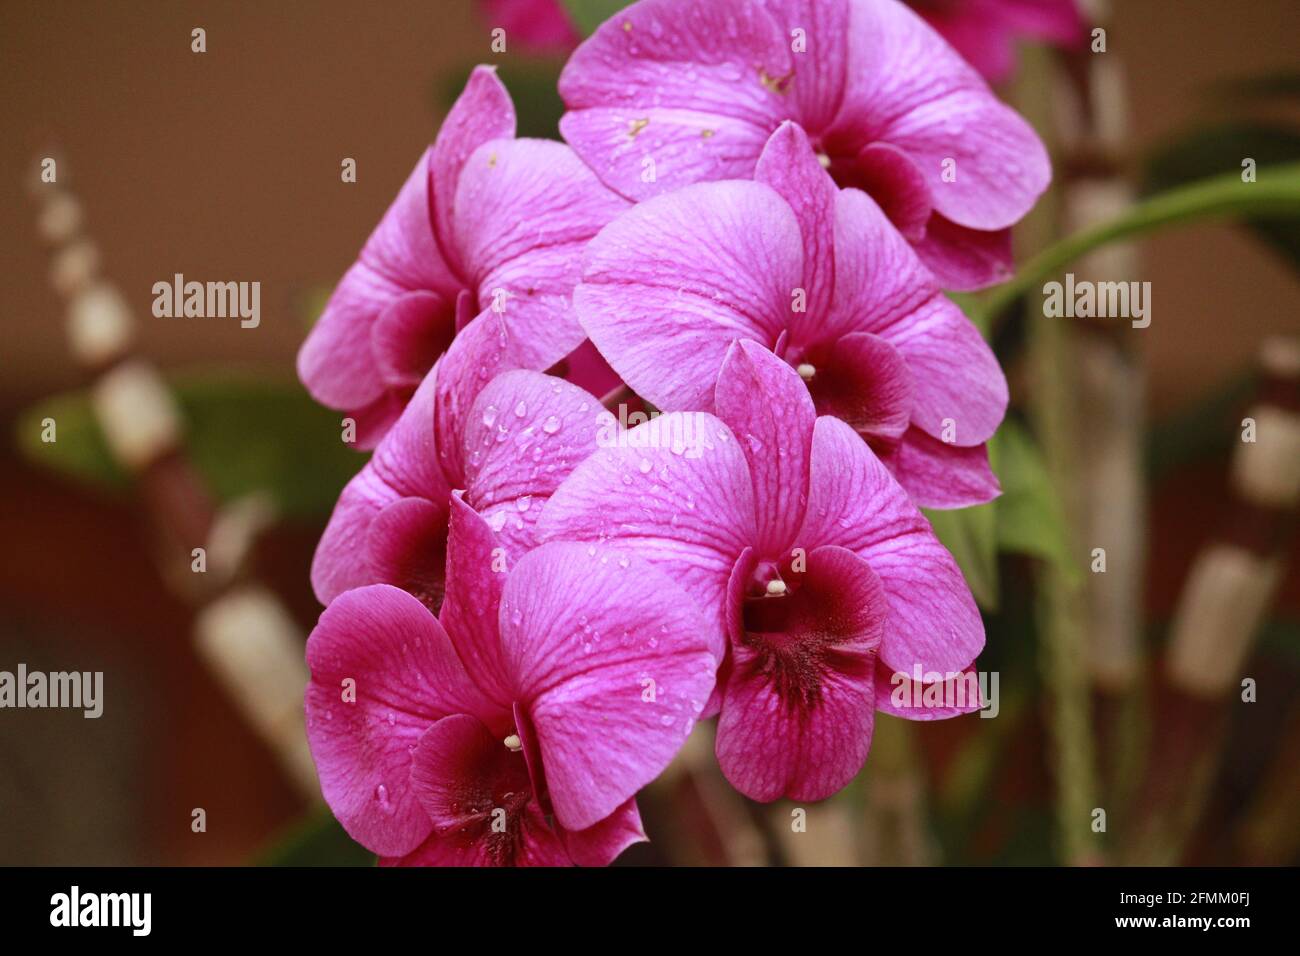 Close up photo of beautiful purple pink orchid inflorescence with stem and leaves..... Stock Photo